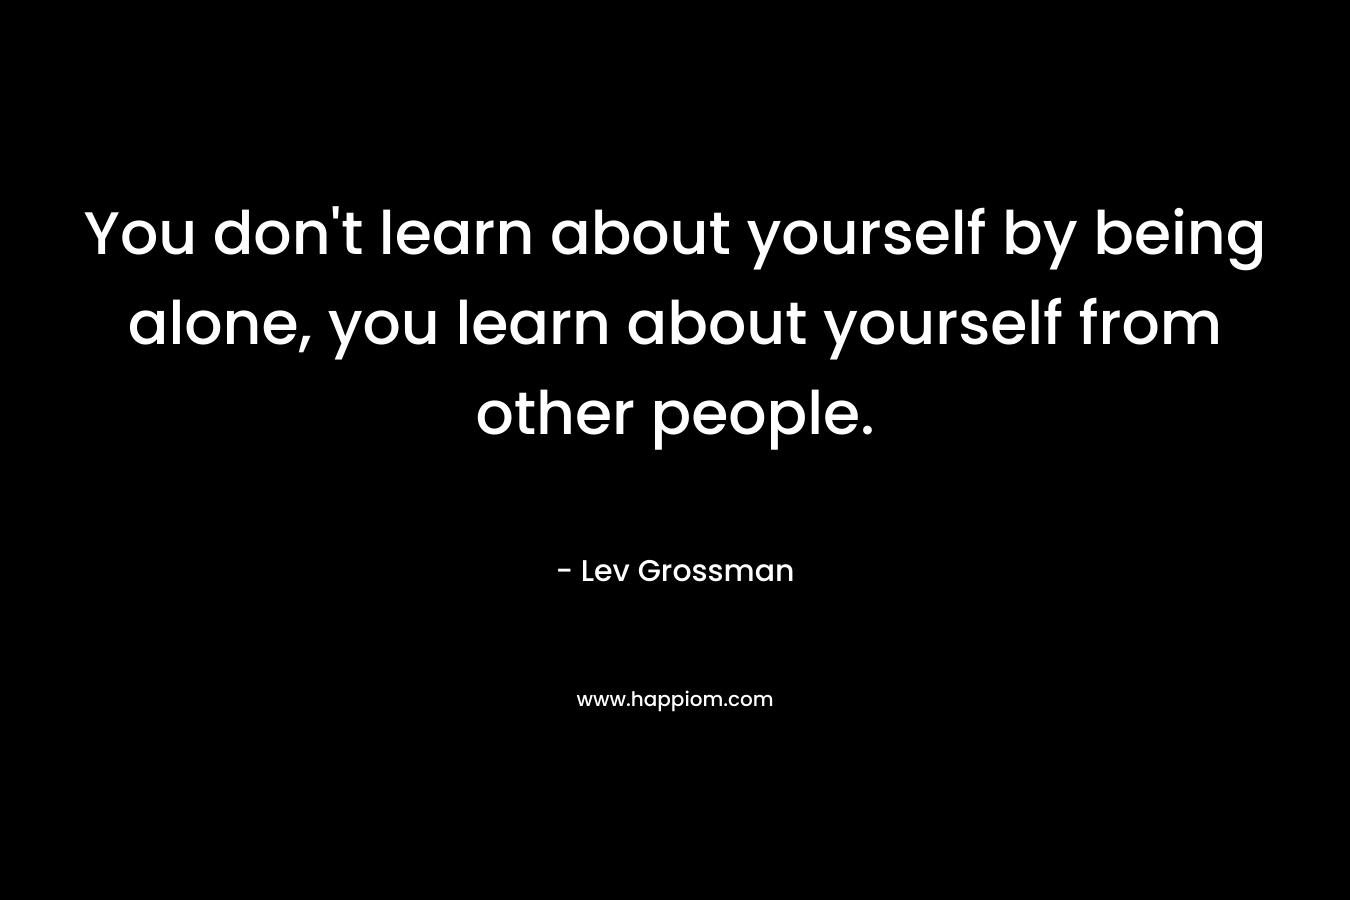 You don't learn about yourself by being alone, you learn about yourself from other people.